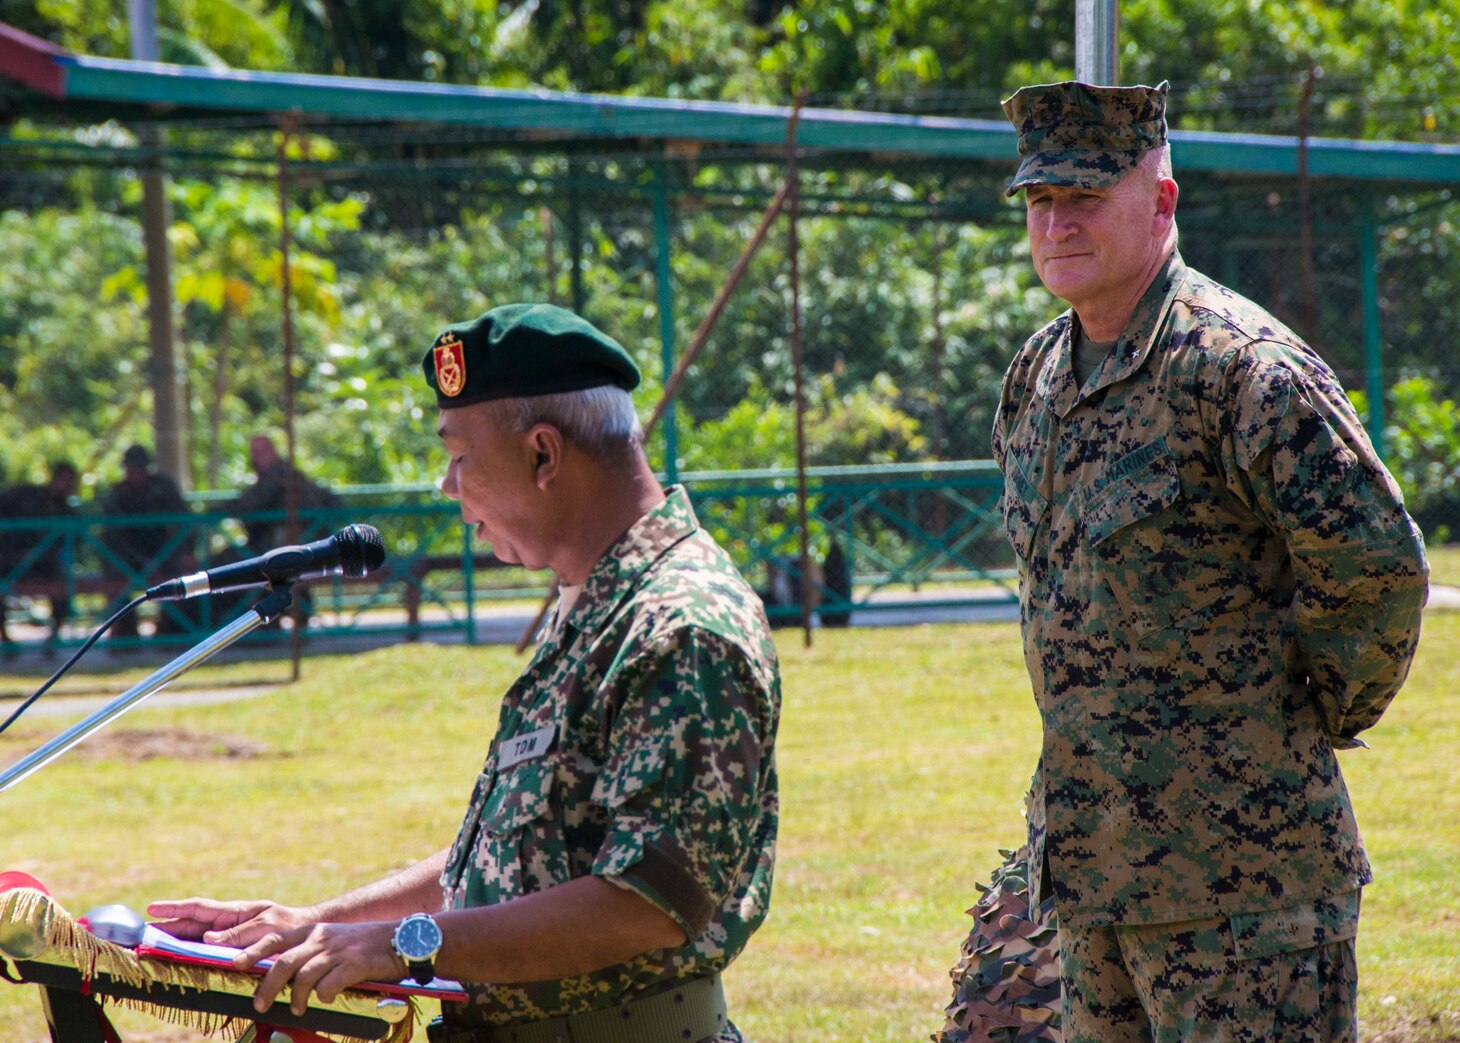 KOTA KINABALU, Malaysia (August 10, 2018) - Brig. Gen. William Jurney, Commanding General of 3rd Marine Infantry Division, stands by while Maj. Gen. Dato� Zulkapri bin Rahamat, General of Officer Commanding Task Force 450, provides his opening remarks during the opening ceremony of Cooperation Afloat Readiness and Training (CARAT) Malaysia on Kota Belud Marine Base. CARAT Malaysia in its 24th iteration, is designed to enhance information sharing and coordination, build mutual warfighting capability and support long-term regional cooperation enabling both partner armed forces to operate effectively together as a unified maritime force.